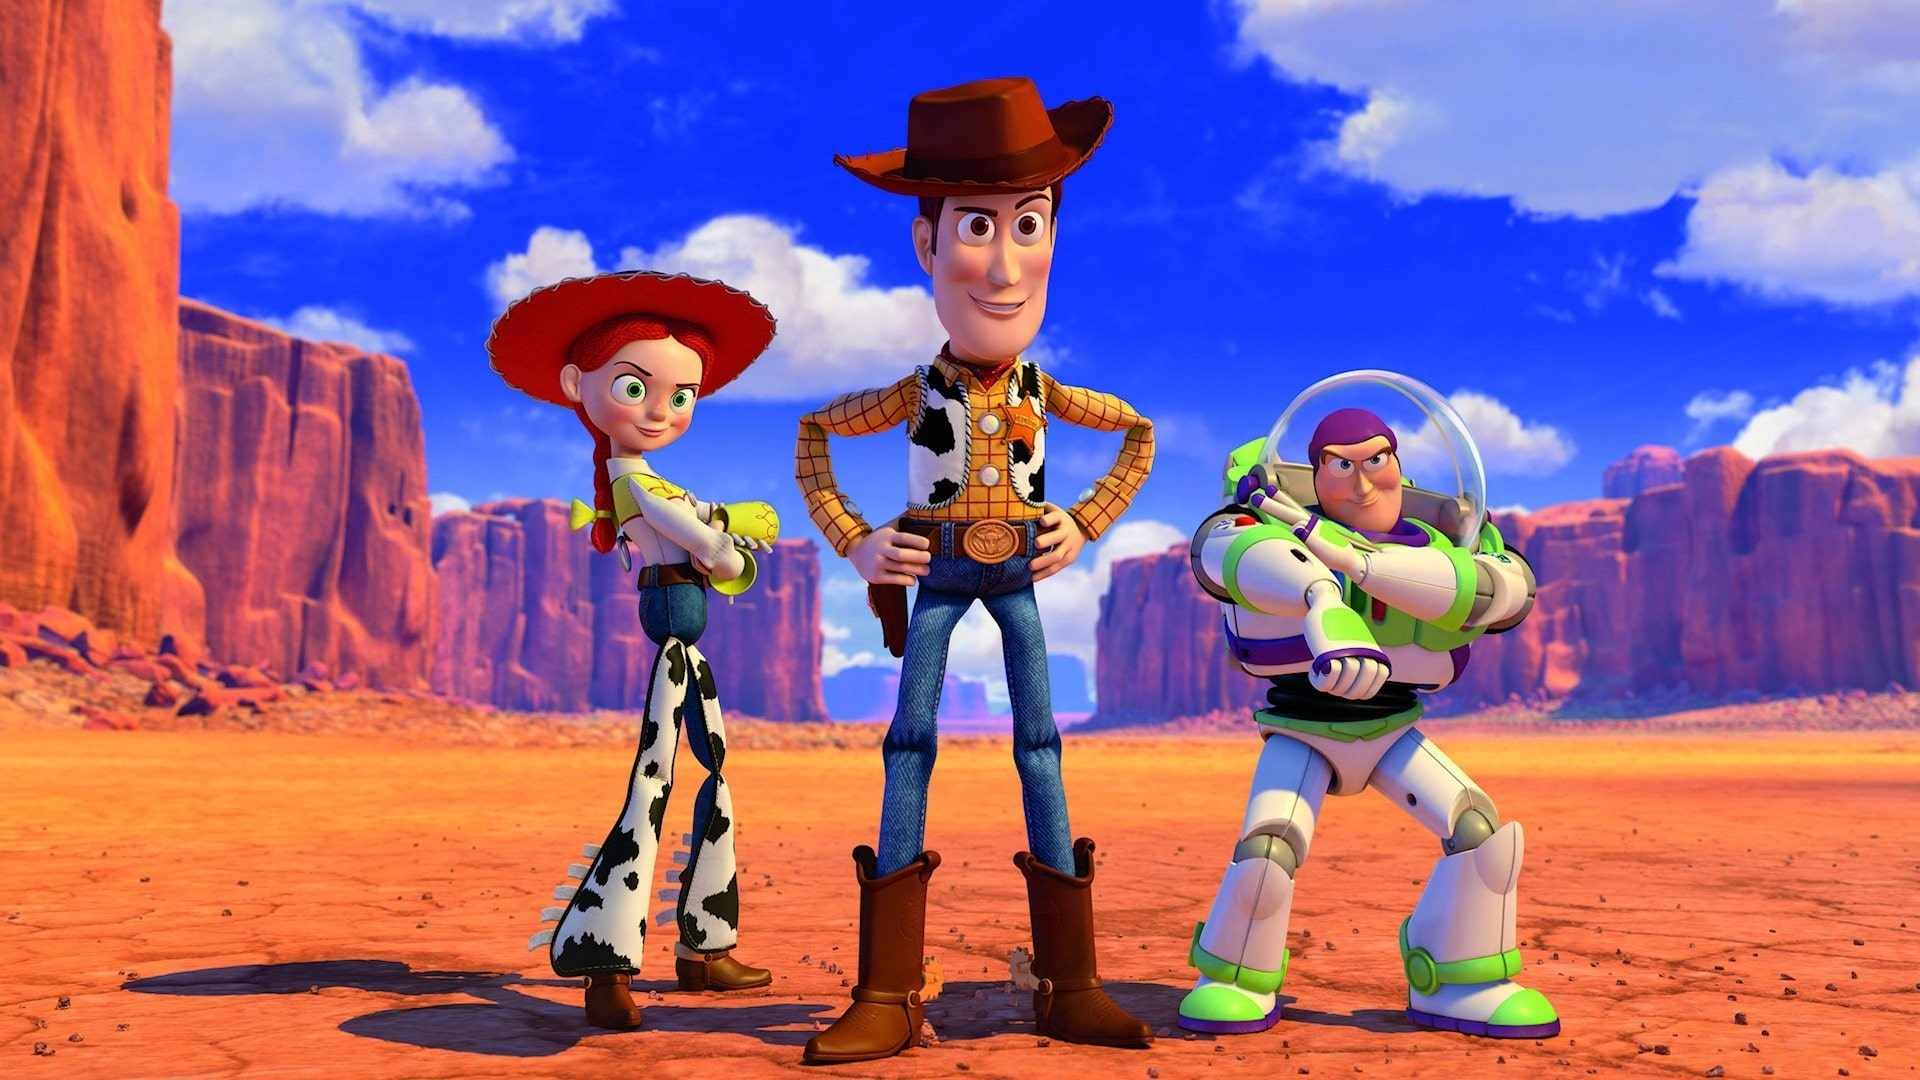 969232 toy story wallpapers 1920x1080 meizu min